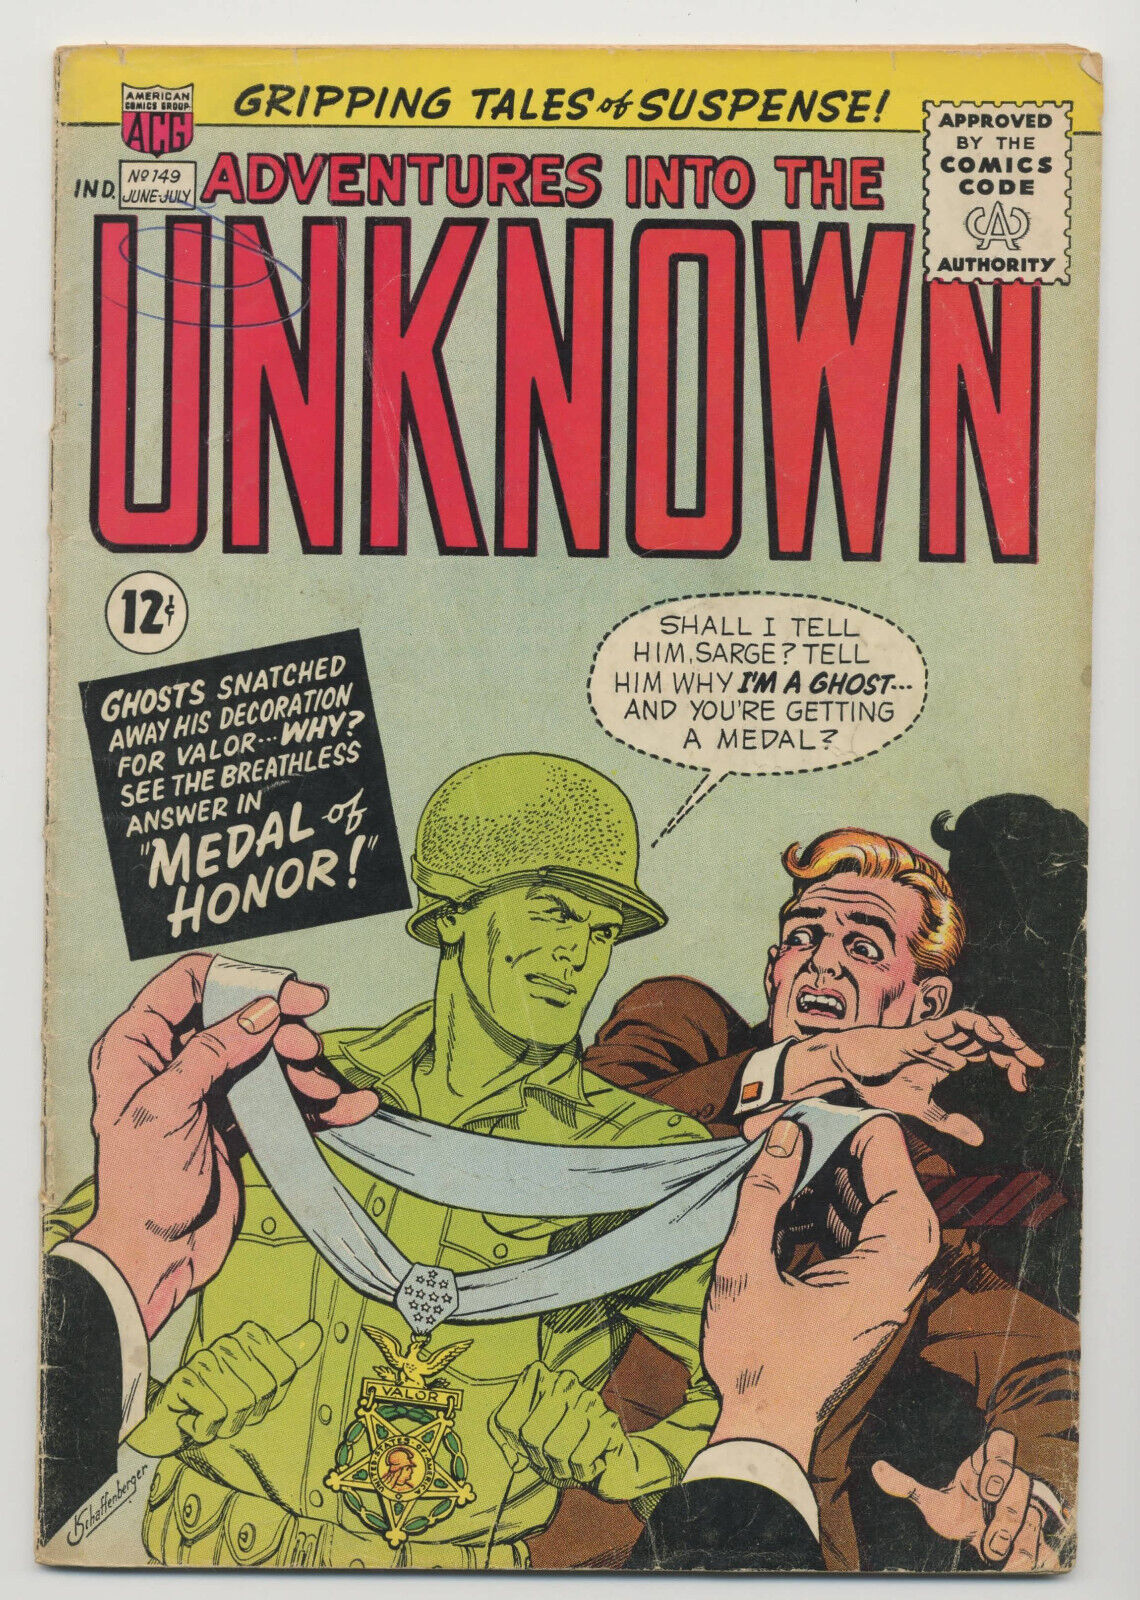 Adventures Into The Unknown No. 149 June-July 1964